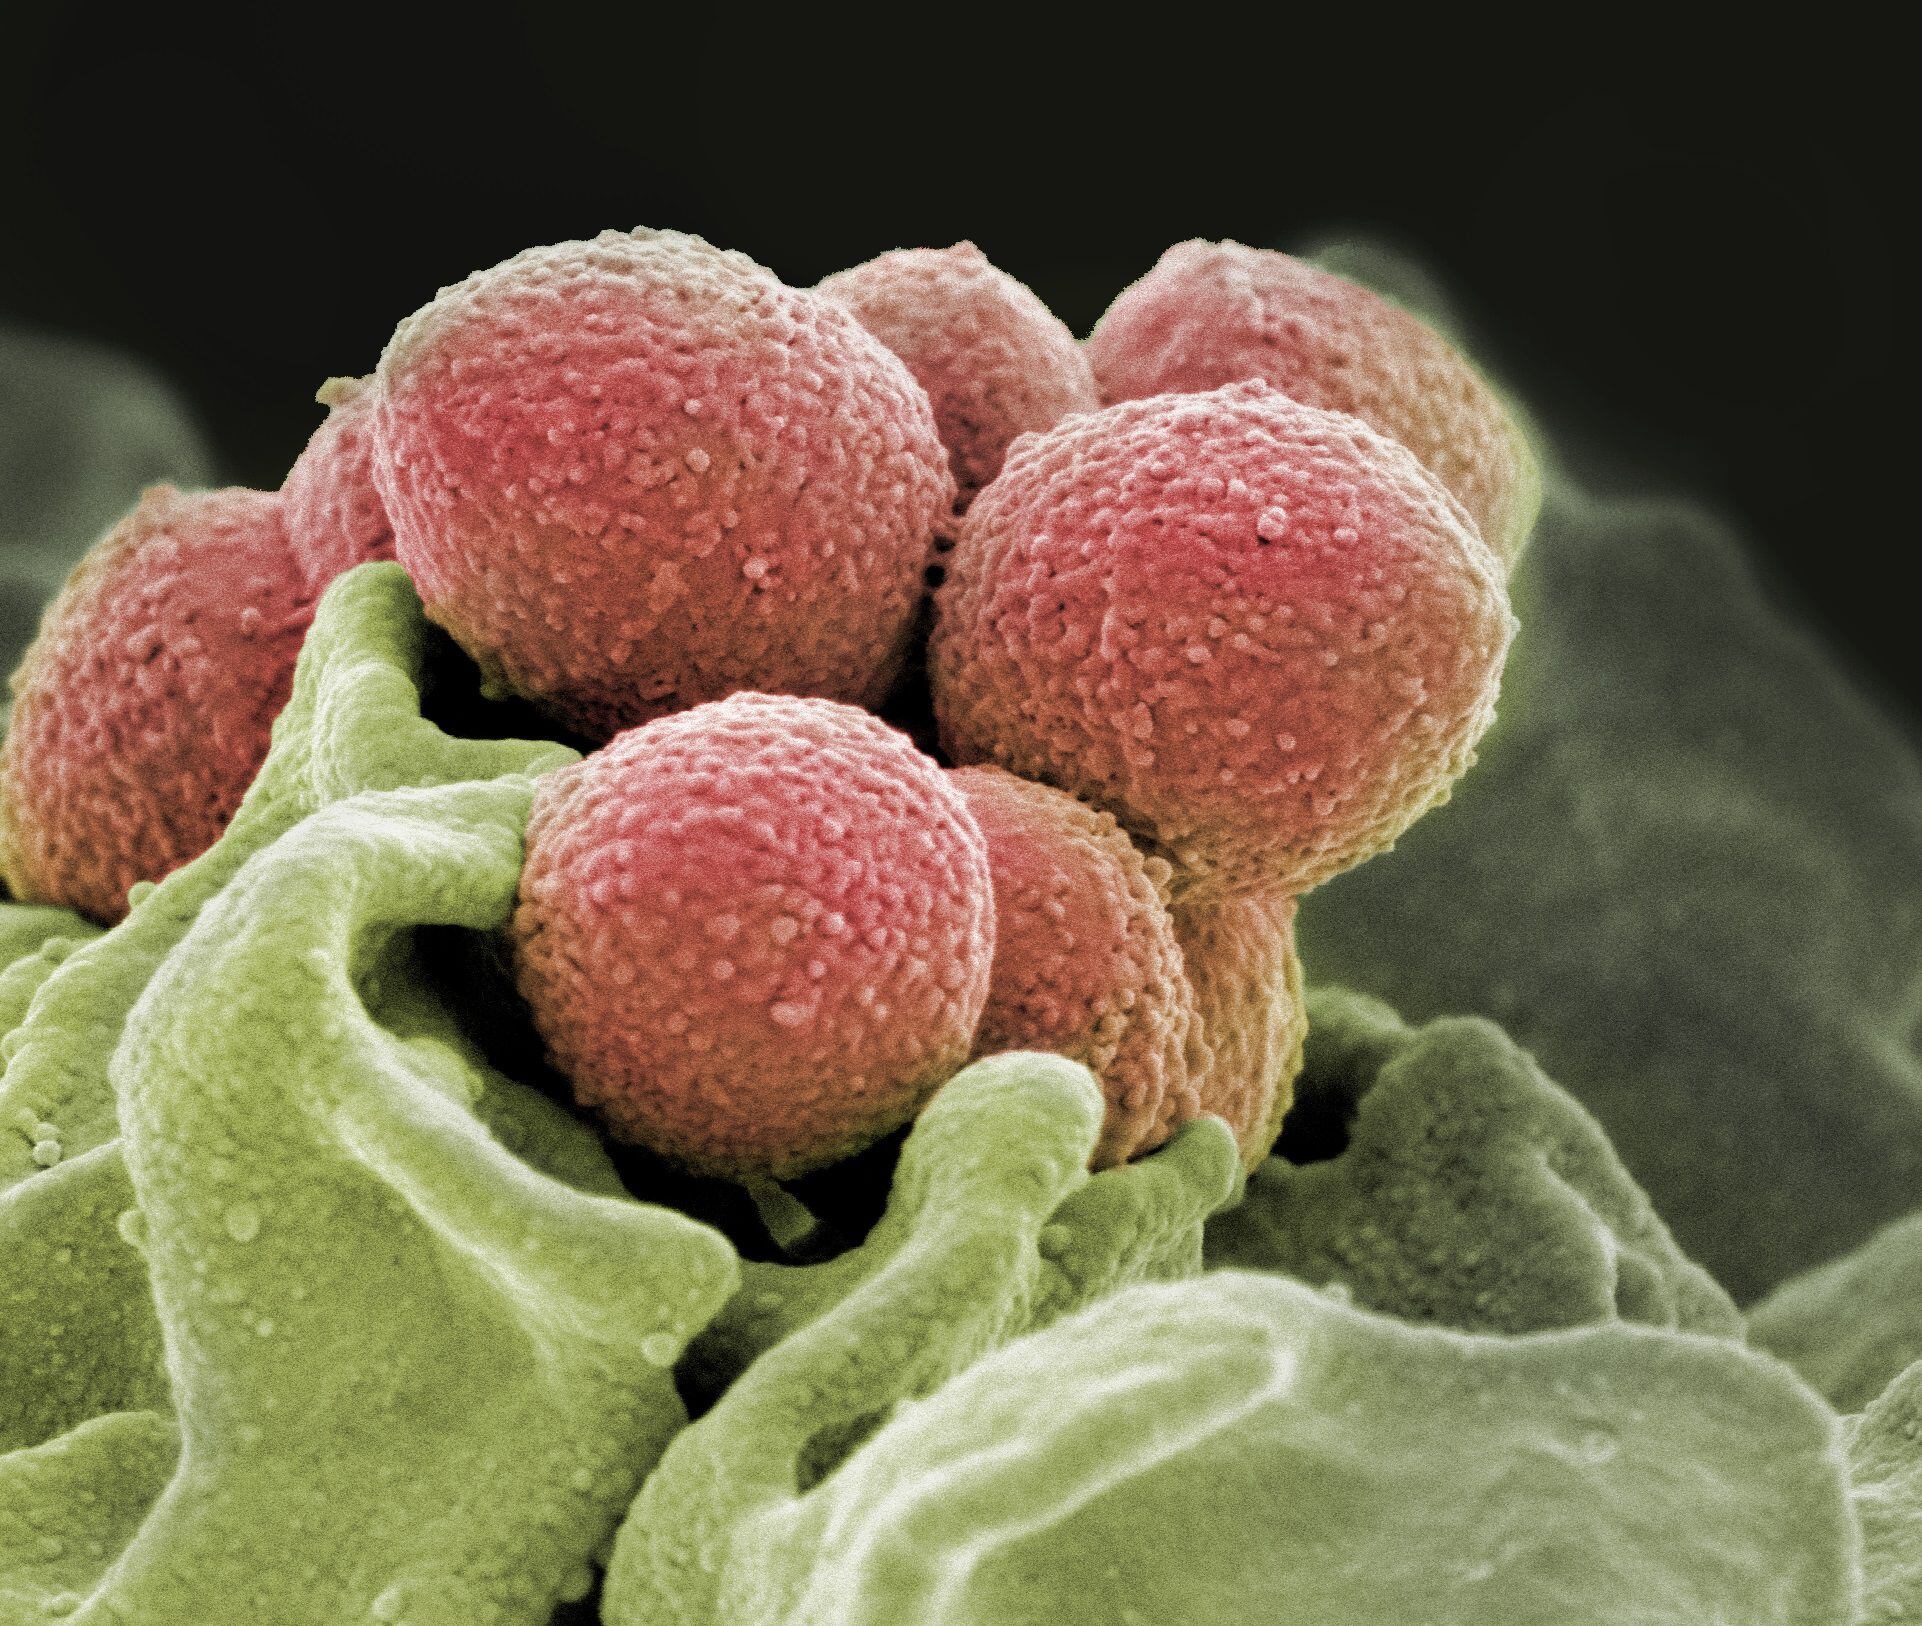 scanning electron microscope image of Staphylococcus pyogenes bacteria (pink).  CREDIT NIH National Institute of Allergy and Infectious Diseases (NIAID)